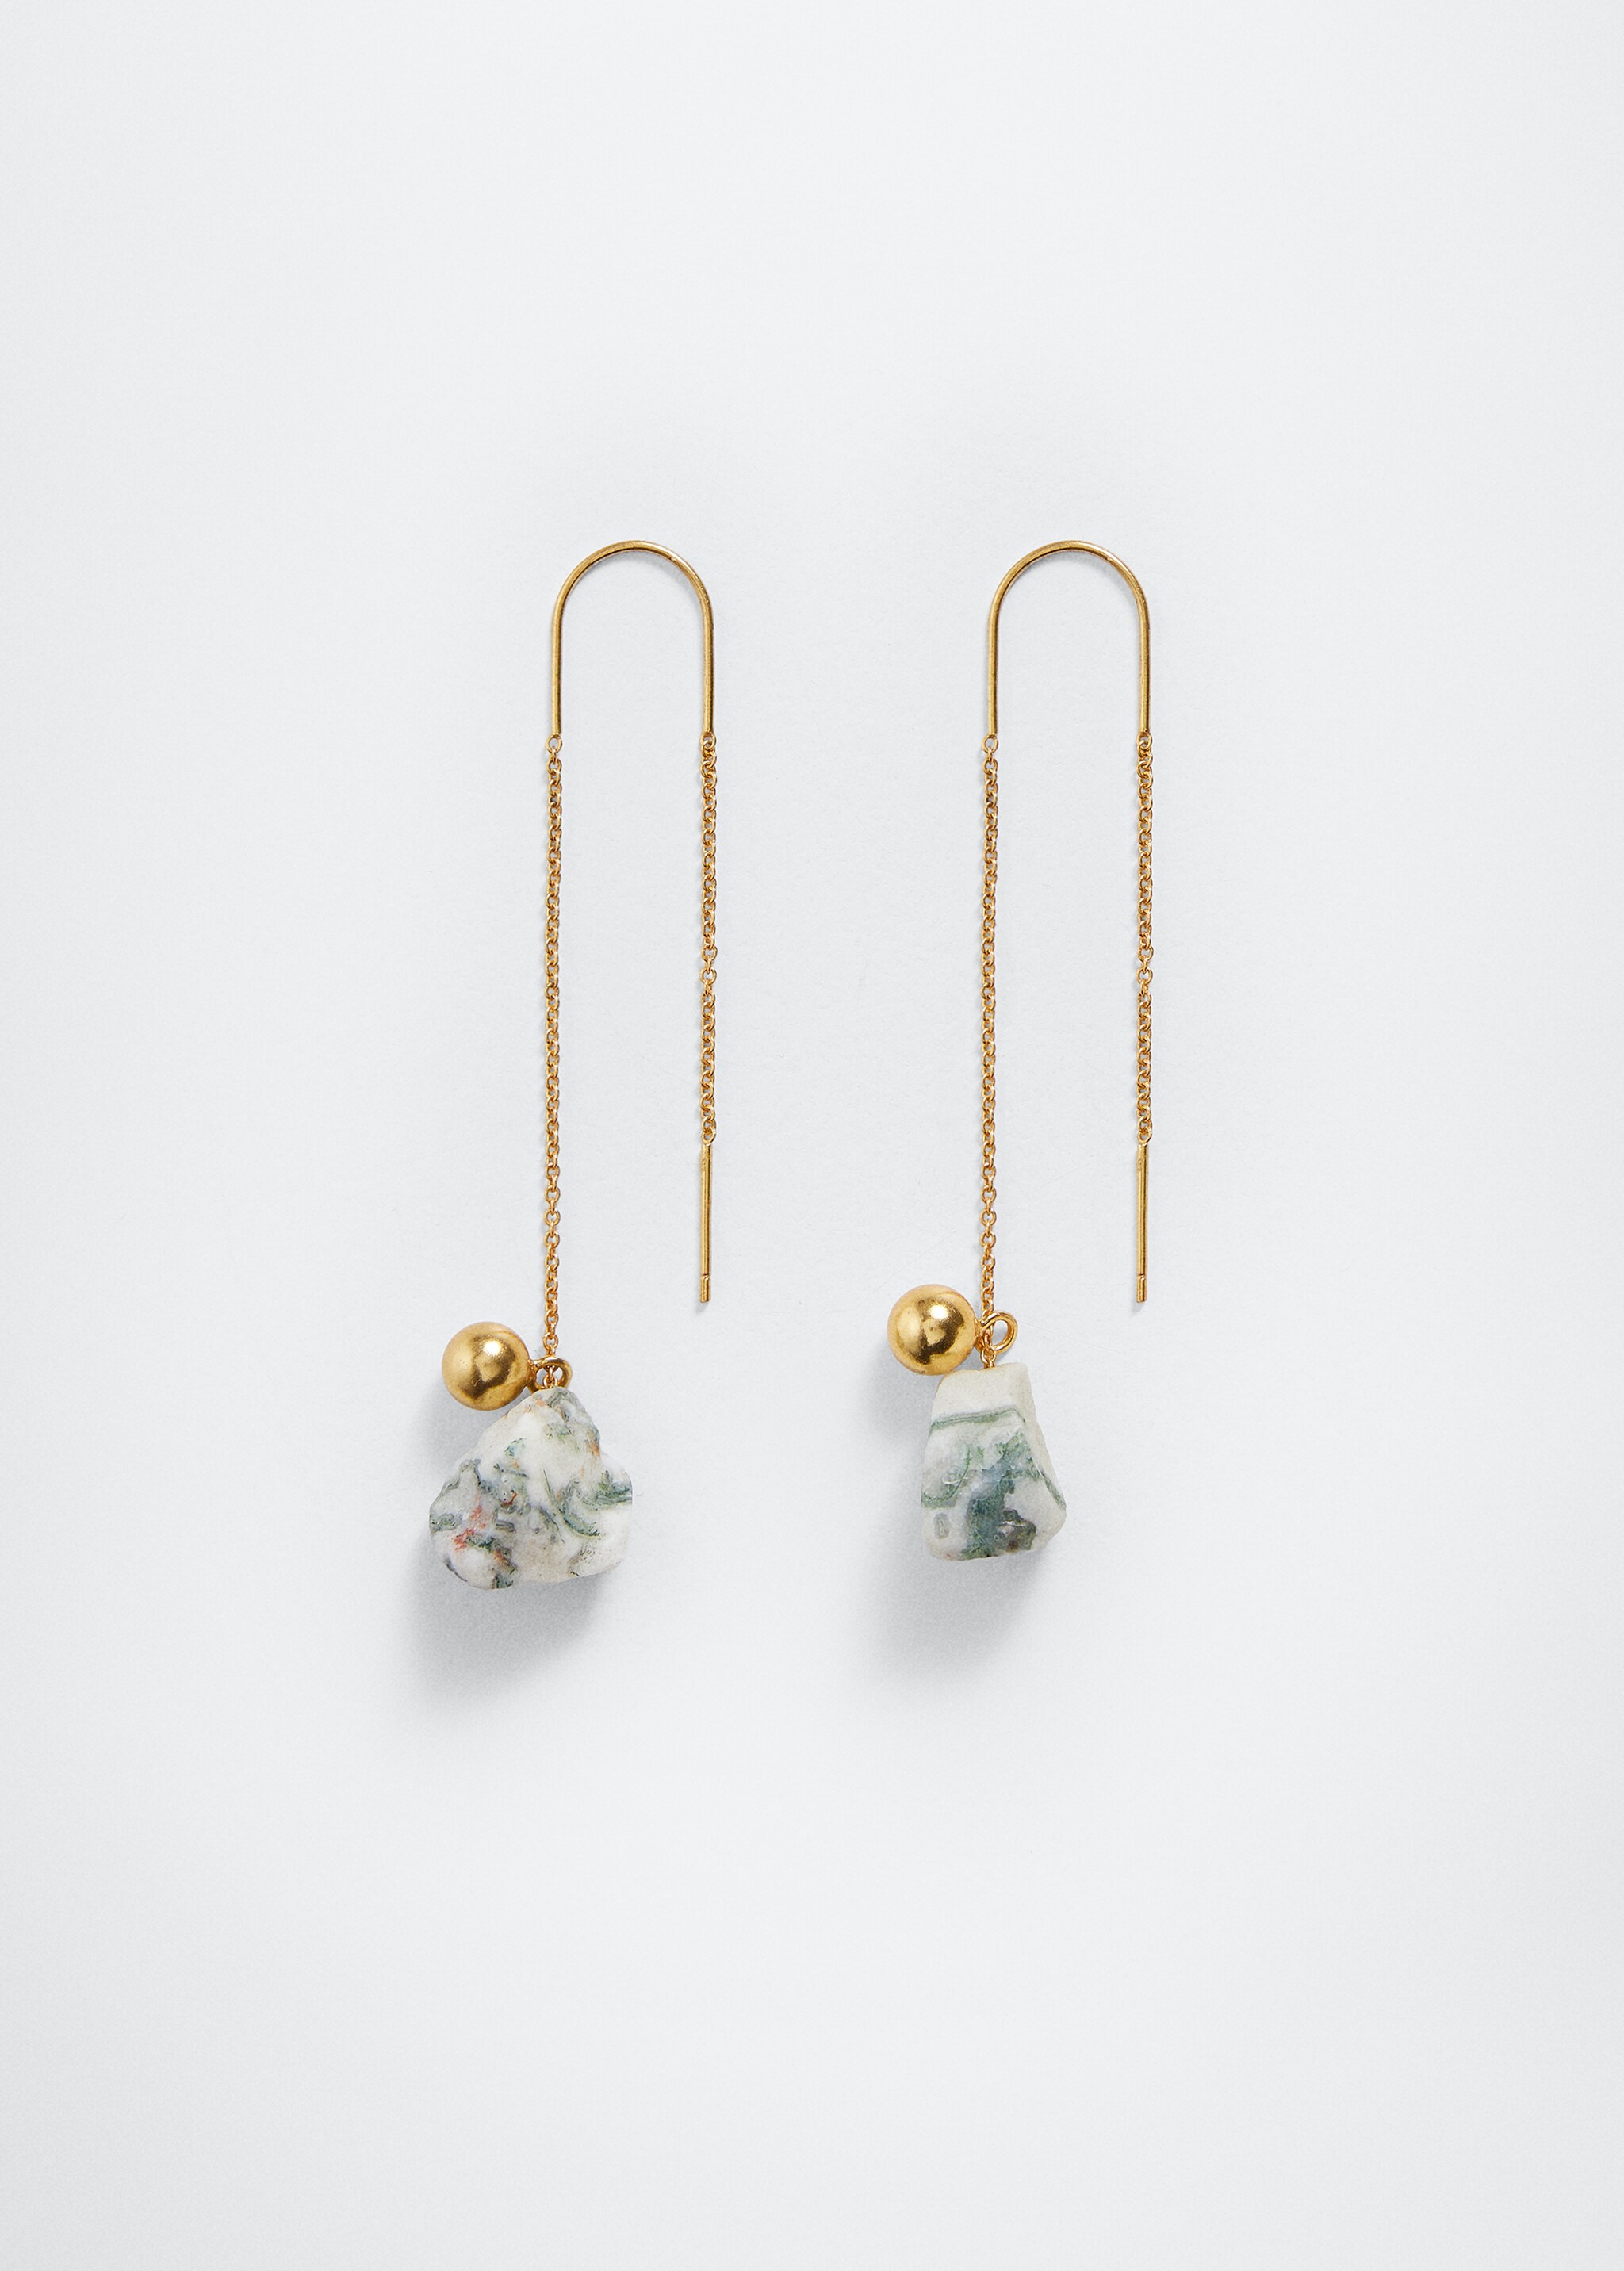 Stone thread earrings - Article without model